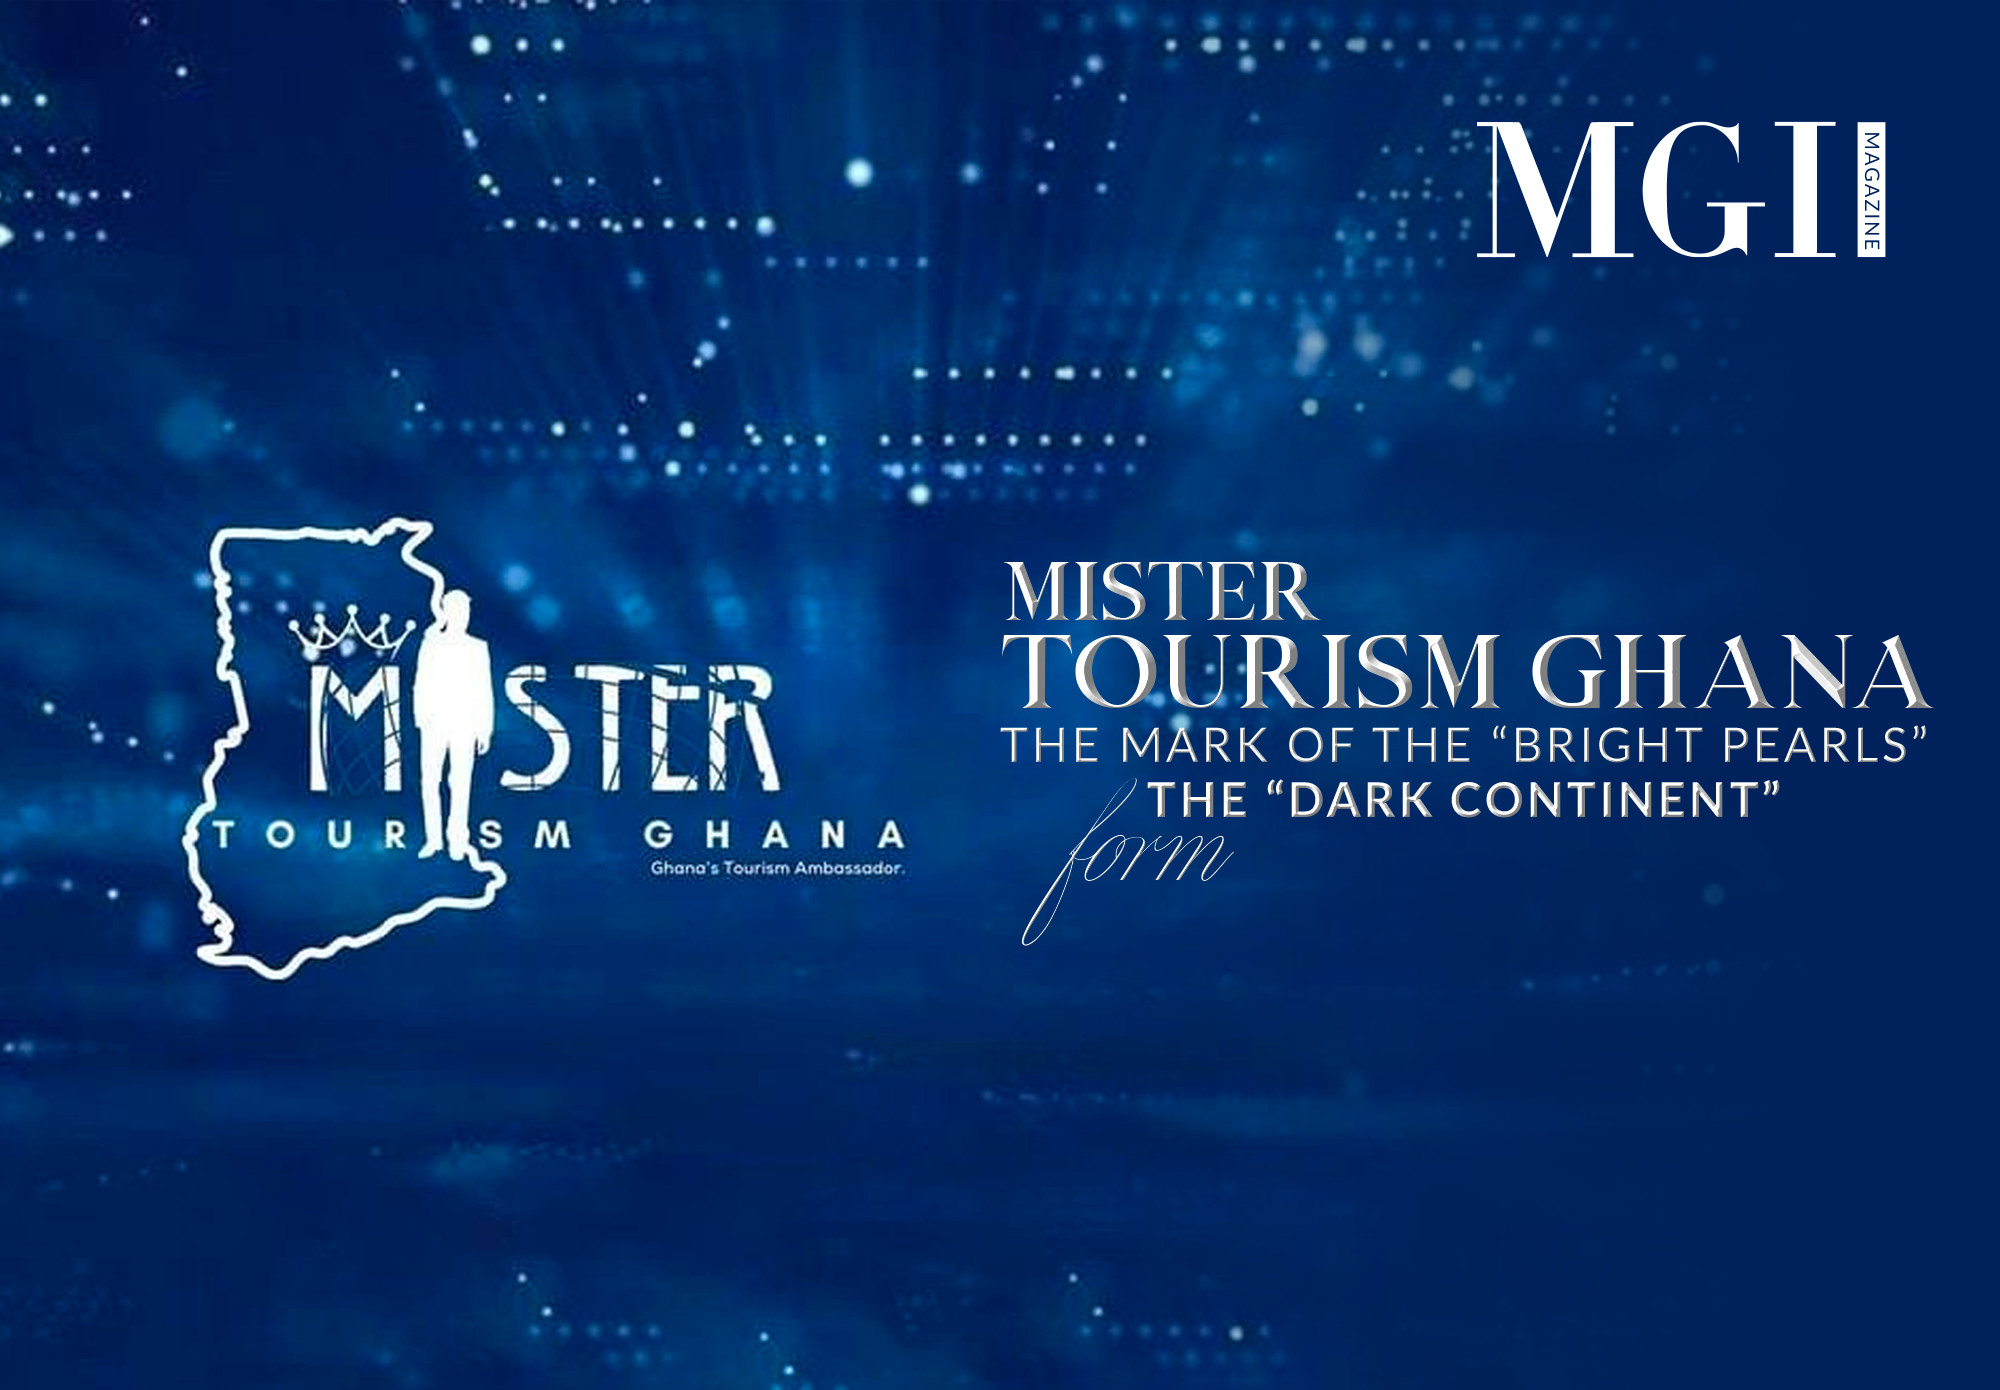 Mister Tourism Ghana - The mark of the “bright pearls” from the “dark continent”